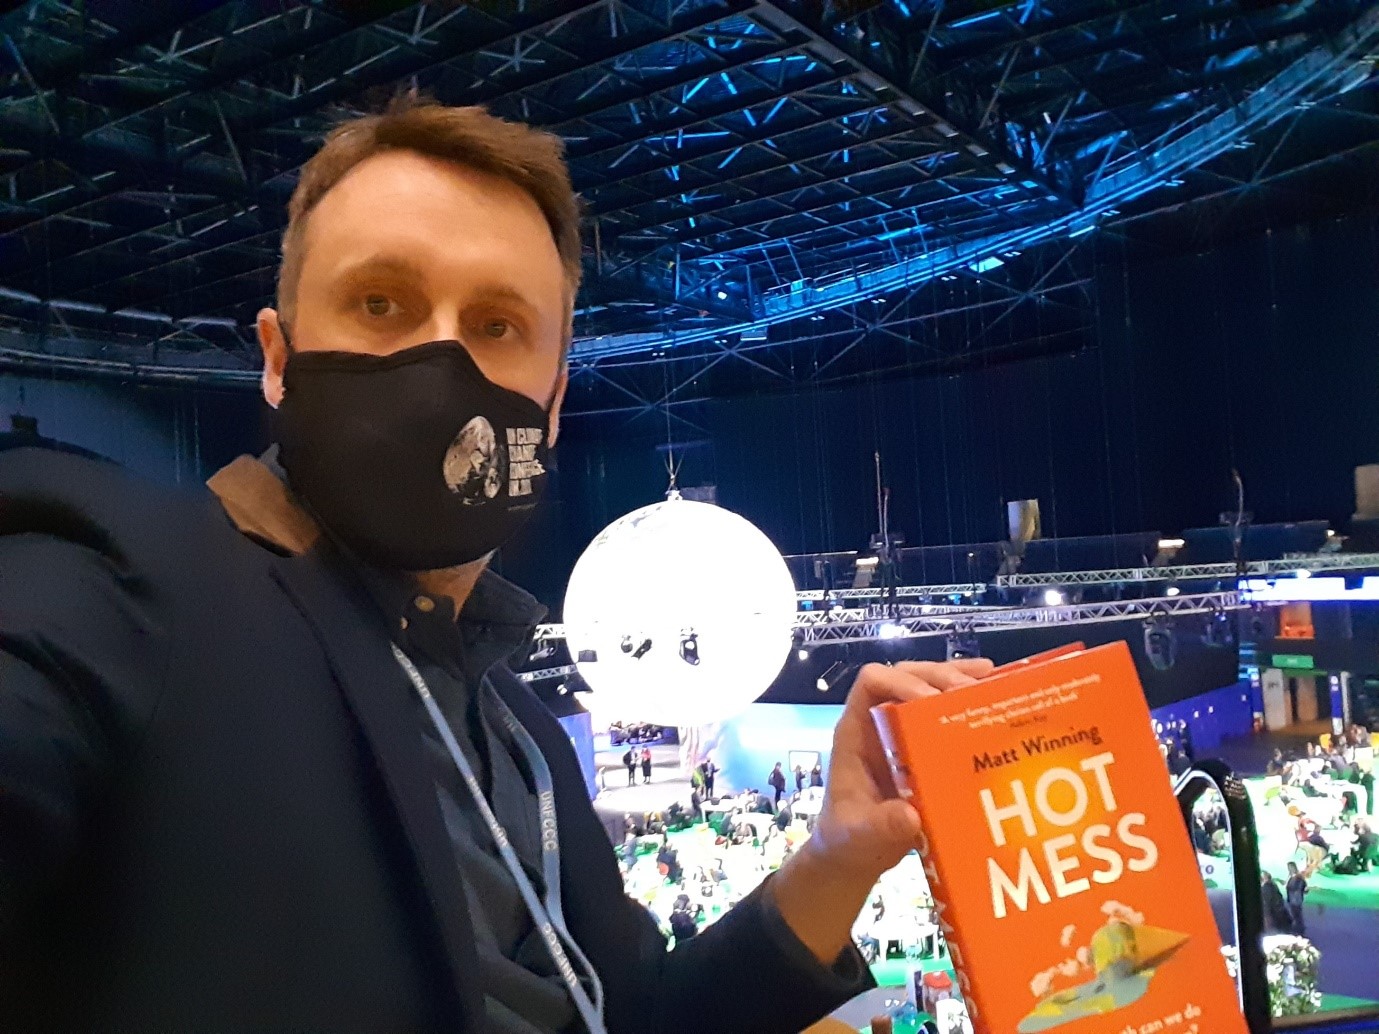 Matt Winning in front of the globe display at COP26 holding his recent book 'Hot Mess'